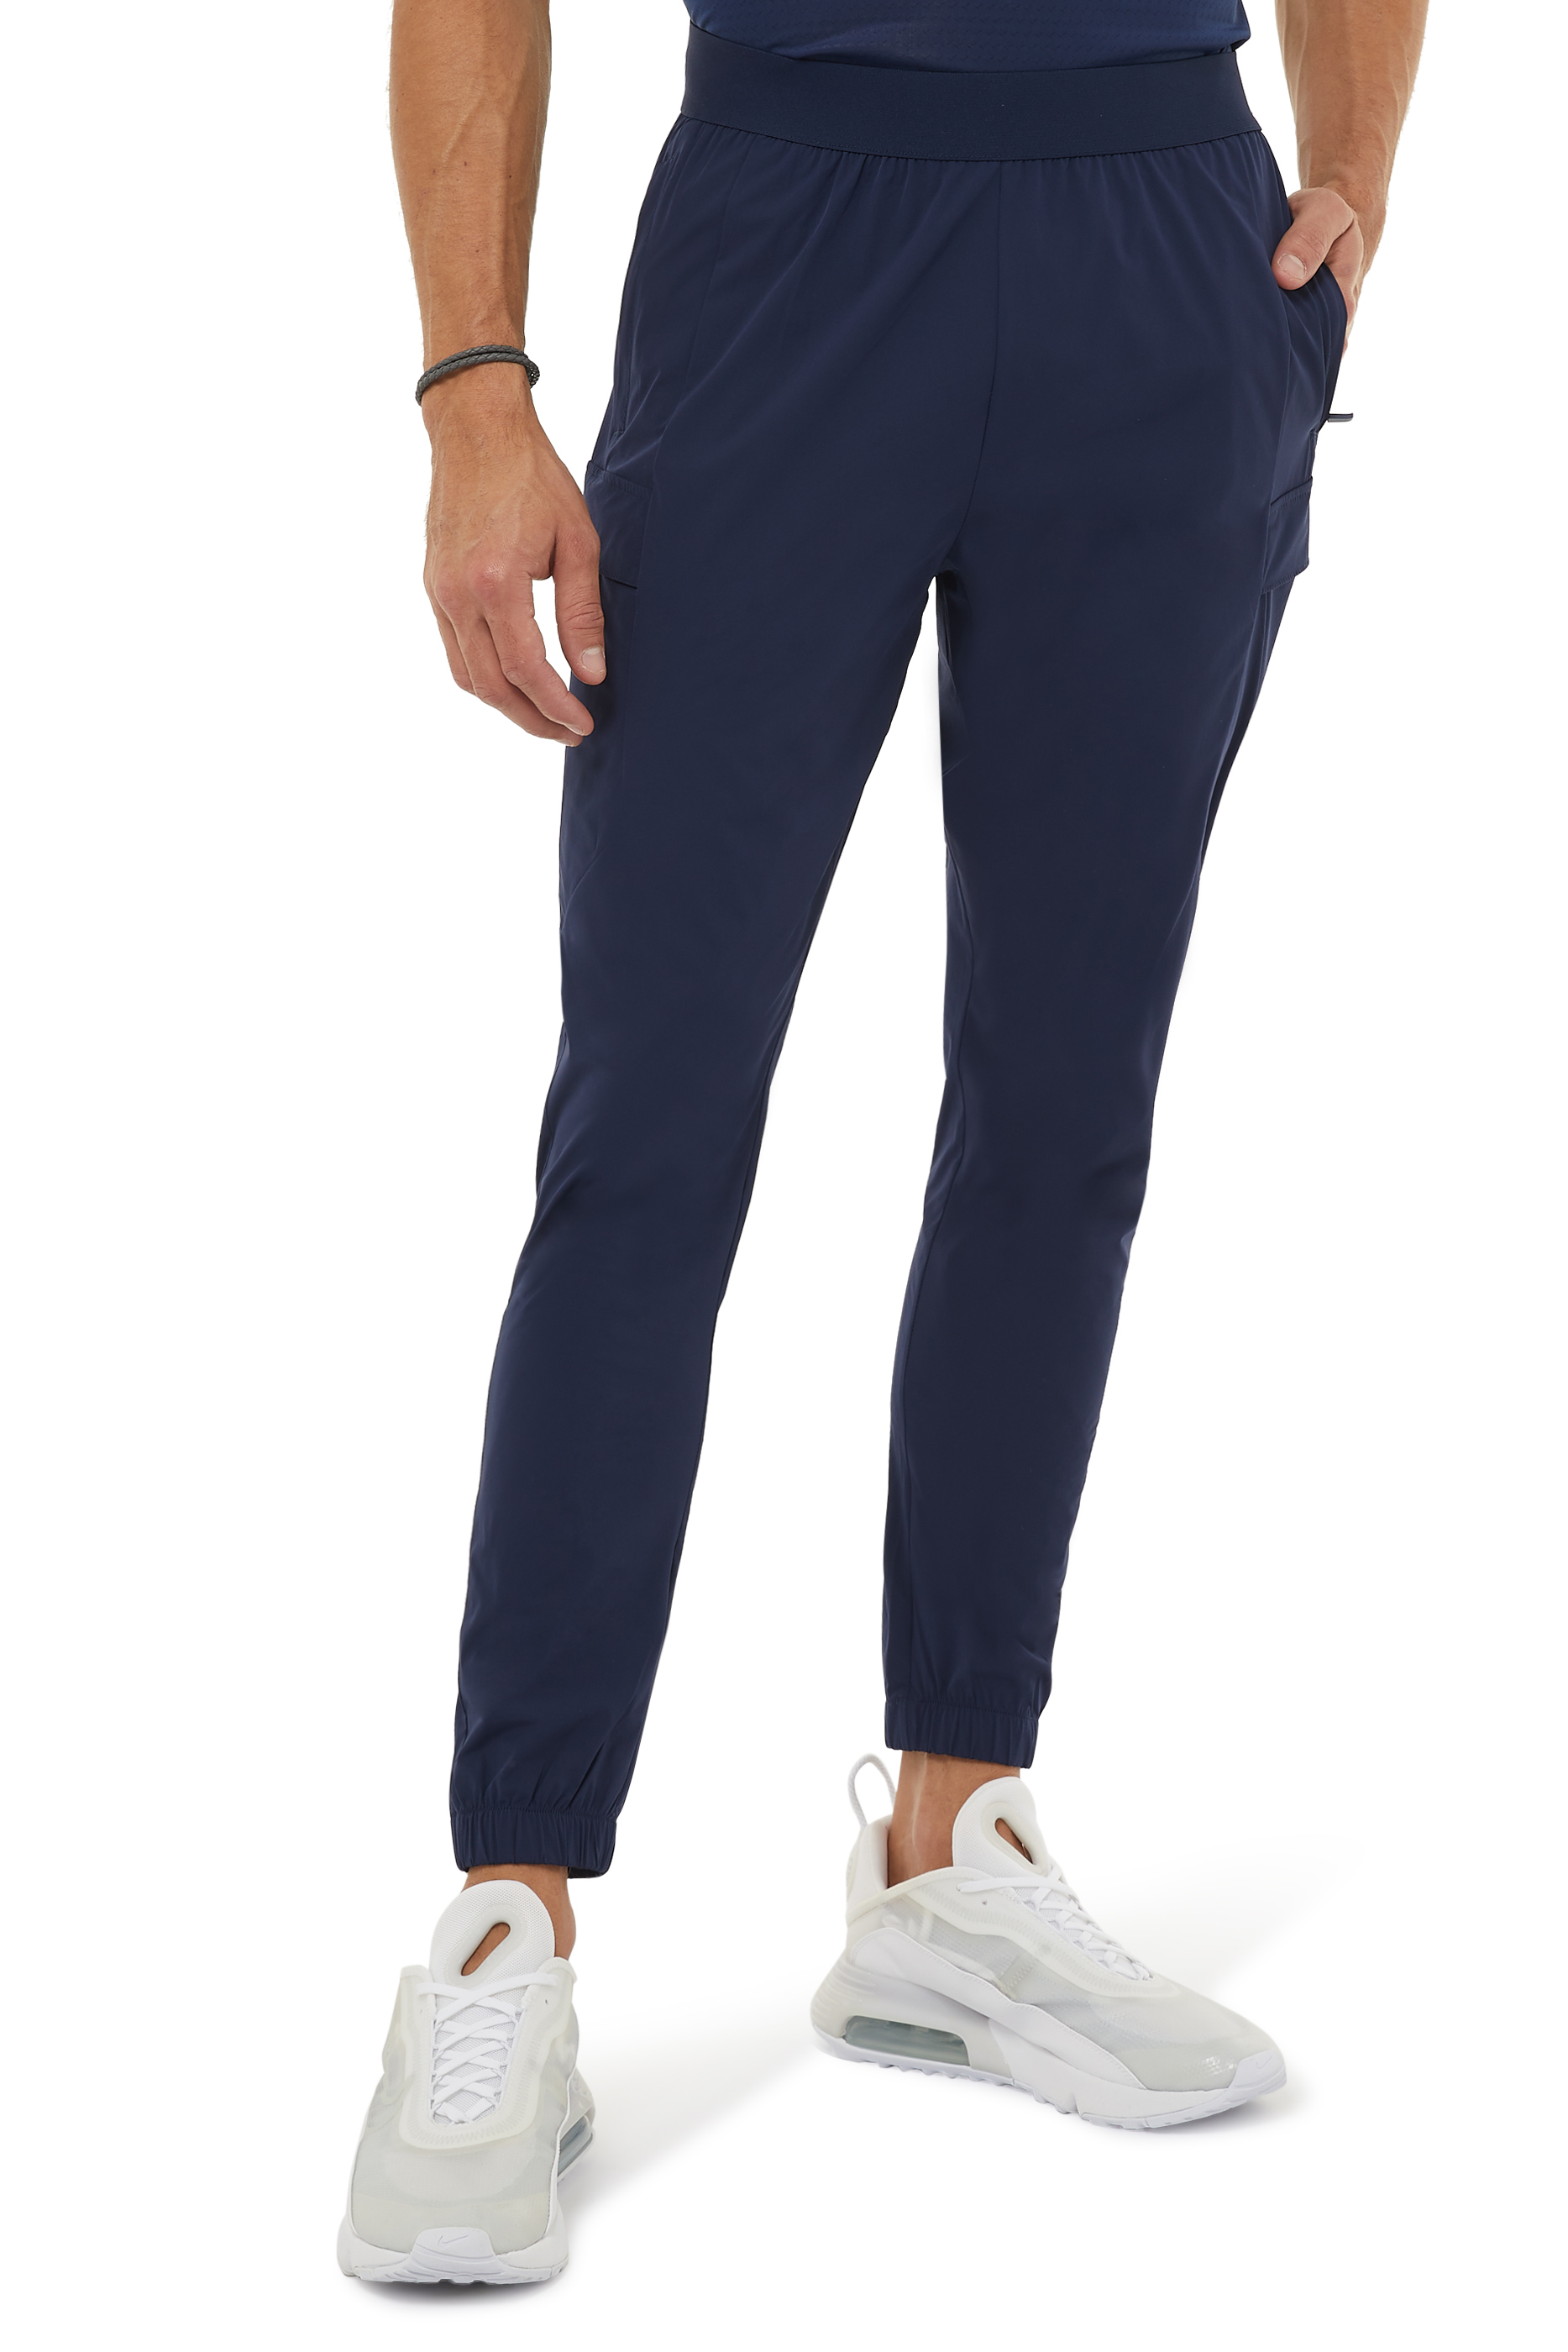 Buy Castore Active Utility Joggers for Mens | Bloomingdale's UAE